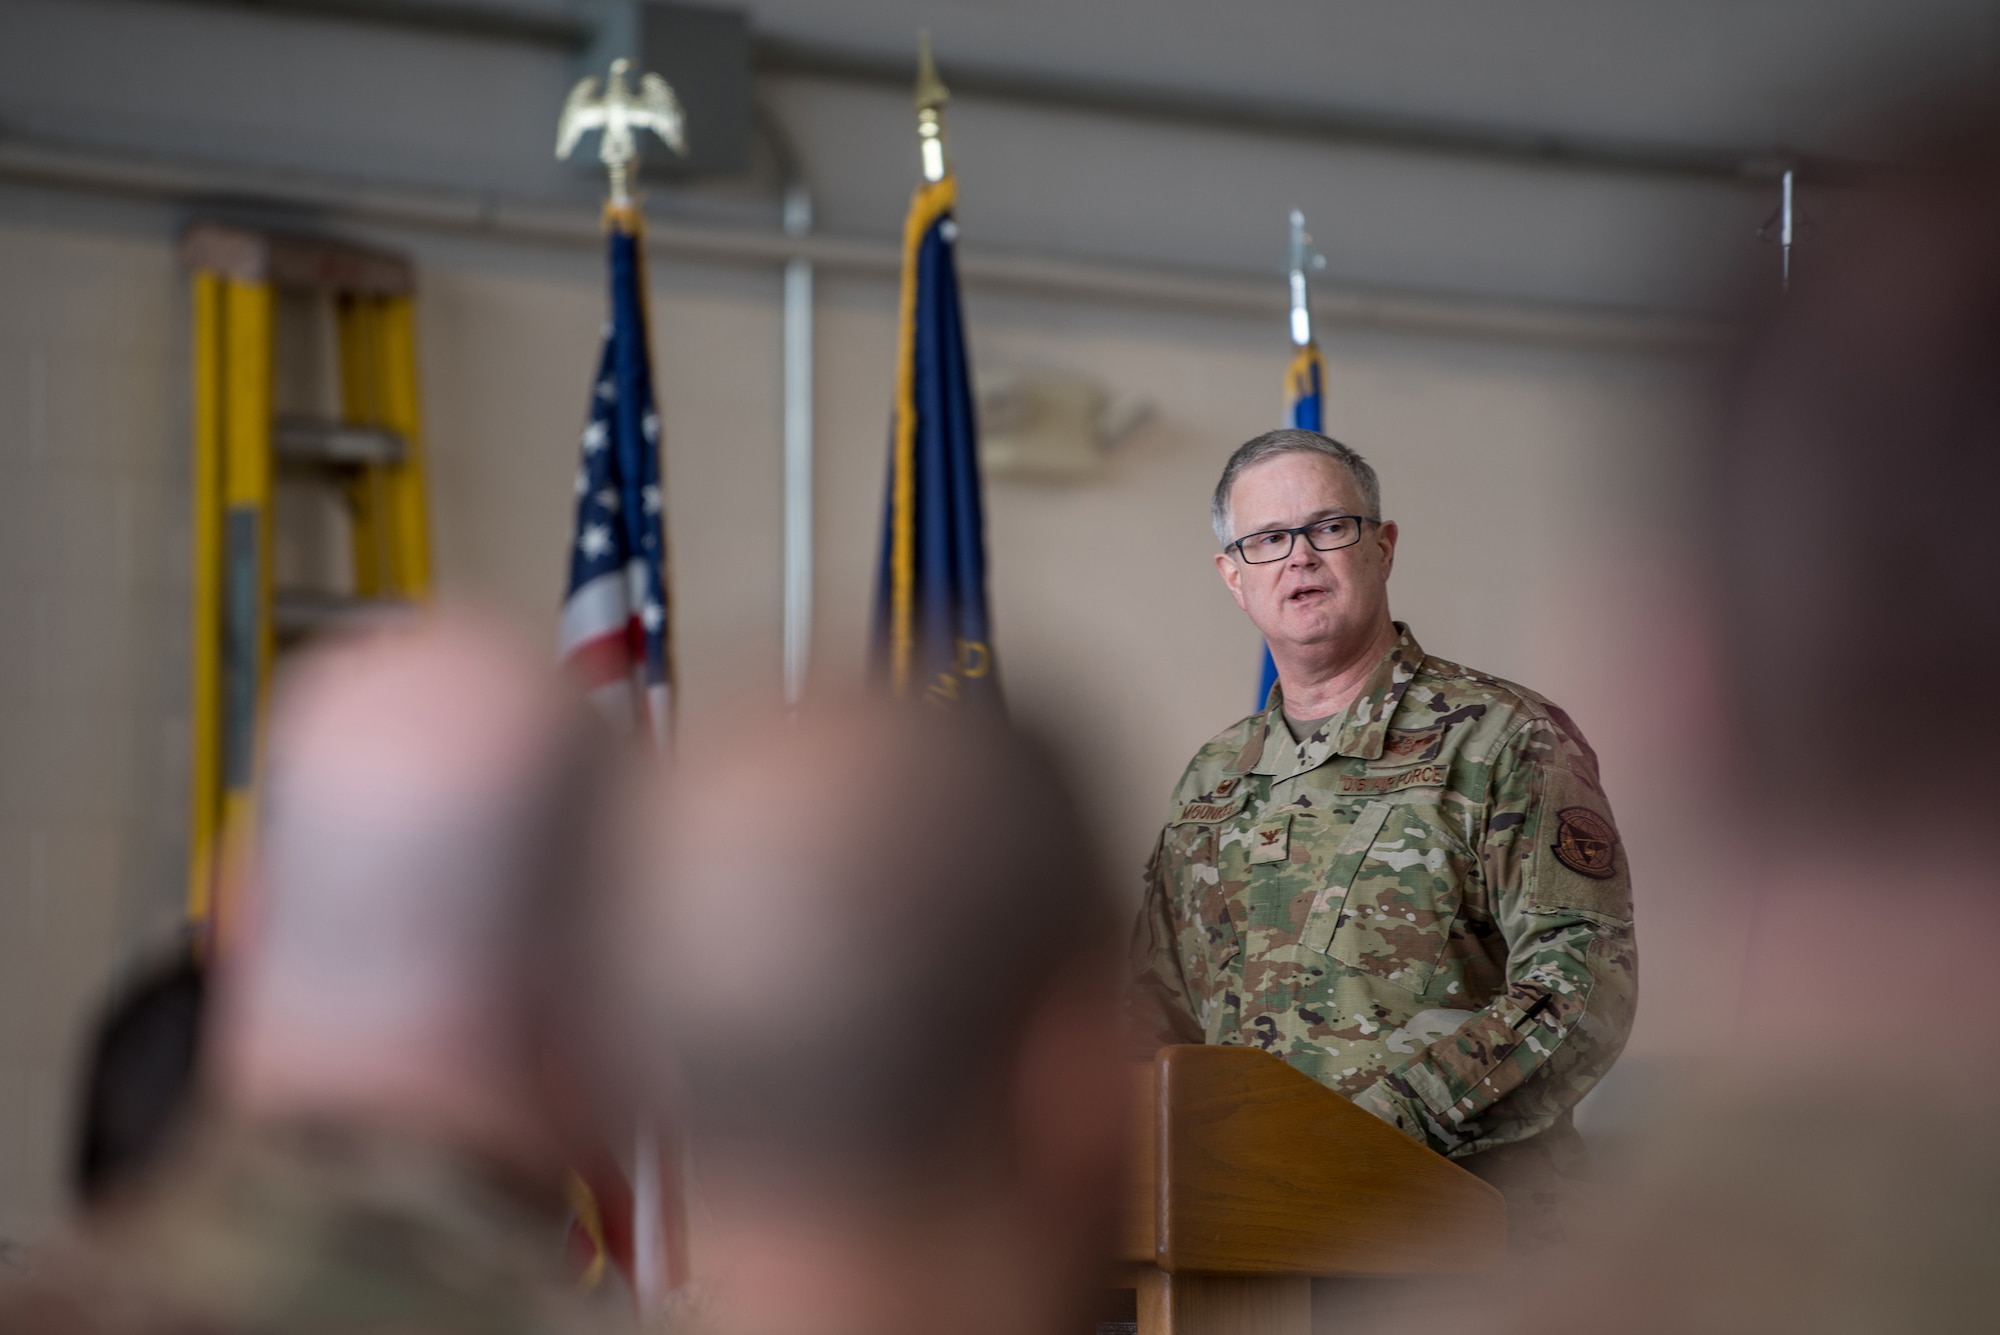 Col. David Mounkes, commander of the 123rd Airlift Wing, speaks to unit members during a ceremony at the Kentucky Air National Guard Base in Louisville, Ky., March 10, 2019. The ceremony, which highlighted the unit’s accomplishments during the past year, concluded with the presentation of the wing’s 18th Air Force Outstanding Unit Award. (U.S. Air National Guard photo by Staff Sgt. Joshua Horton)